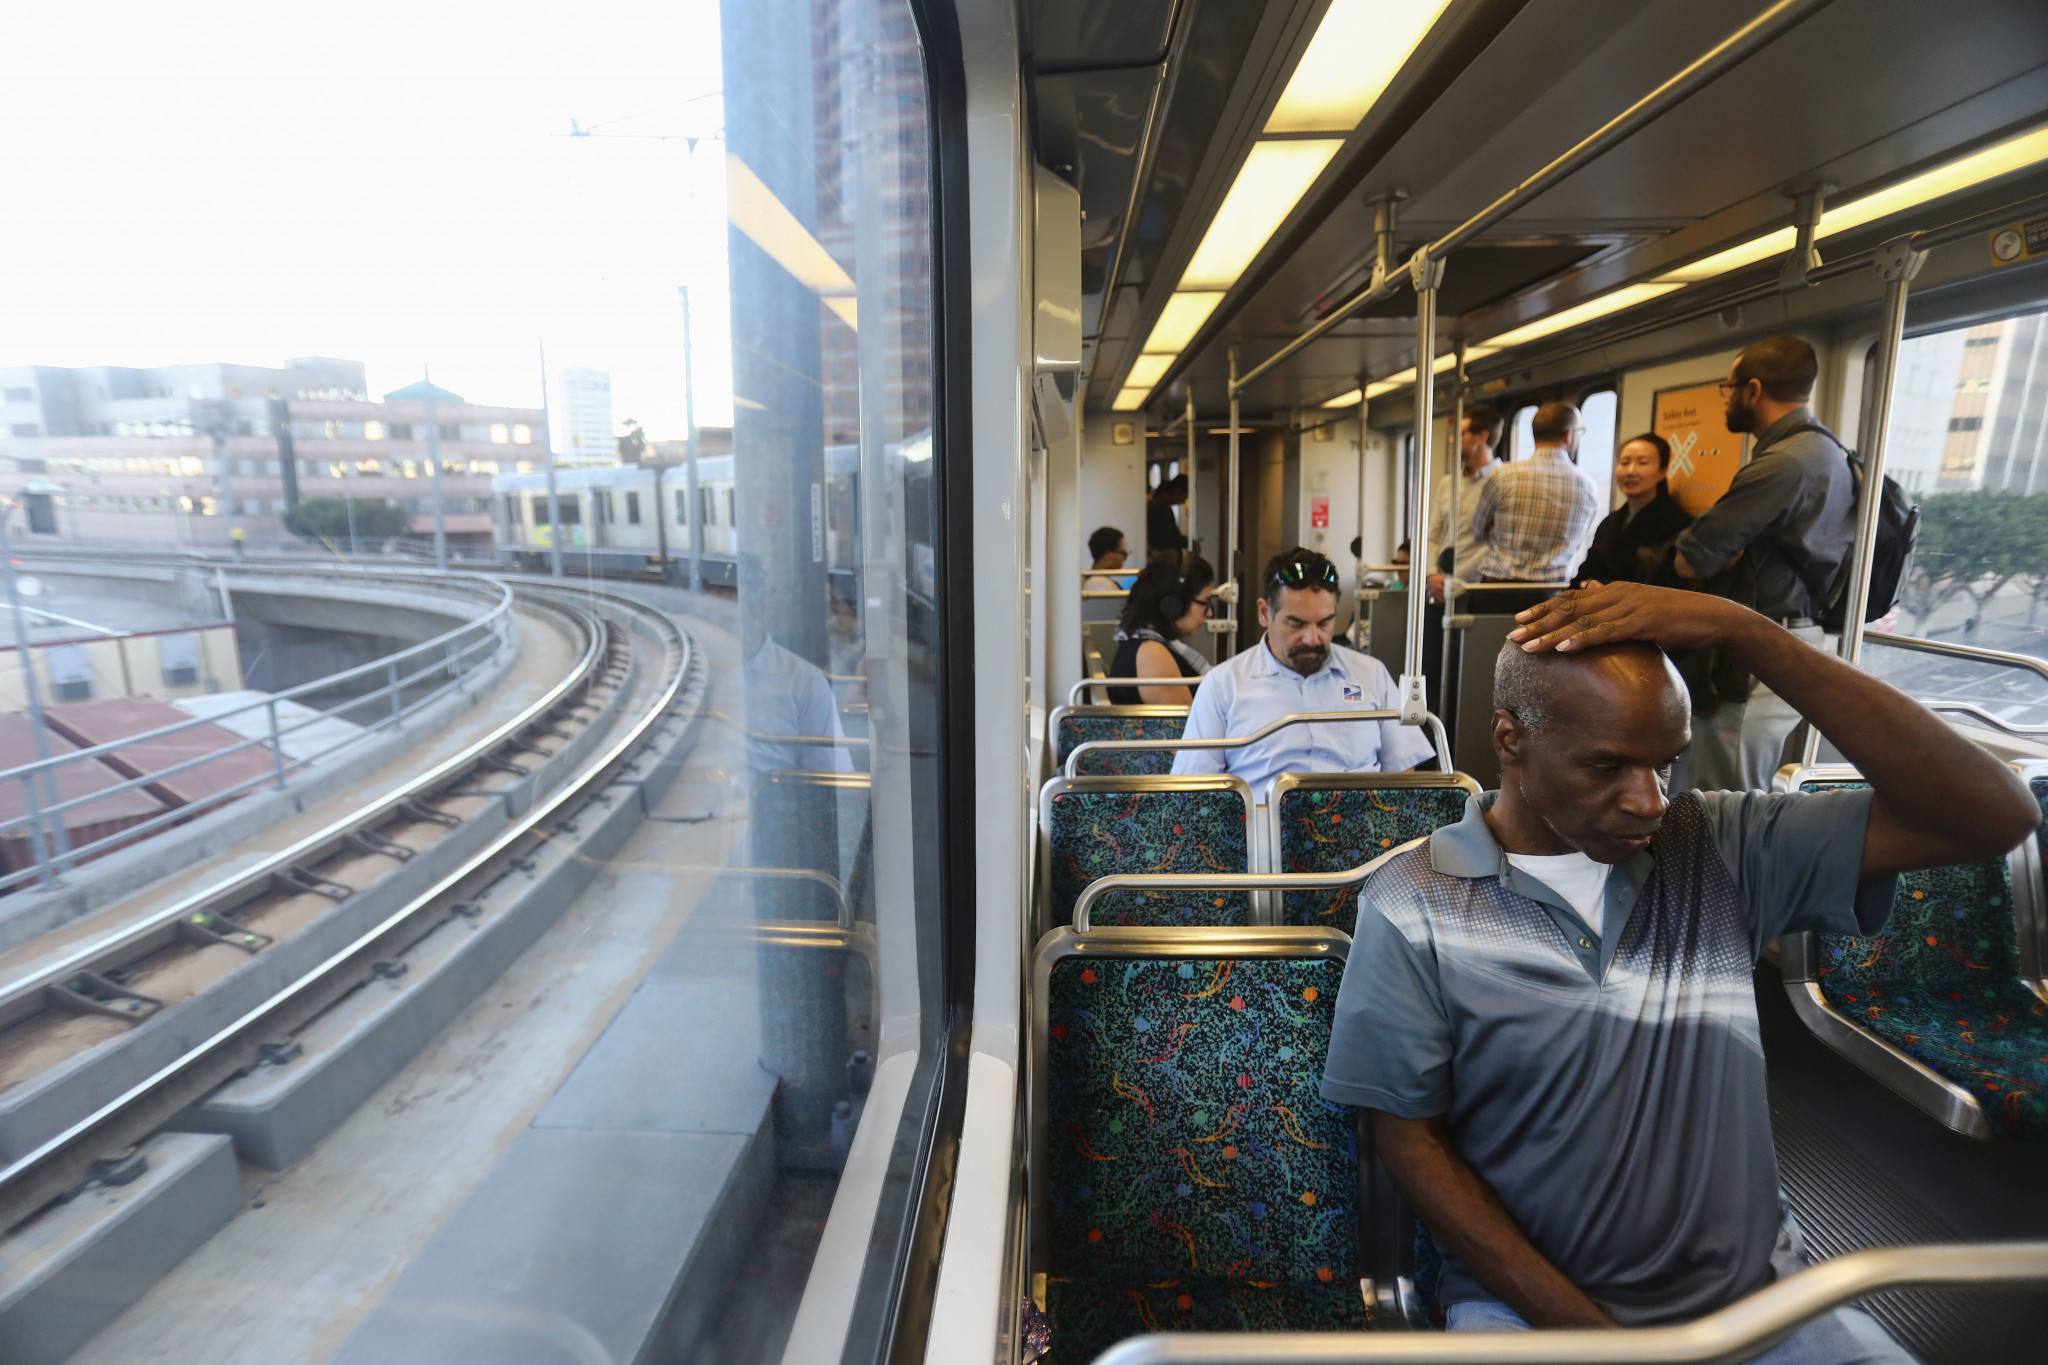 Los Angeles Metro hopes for private sector rail deals before 2028 Olympics